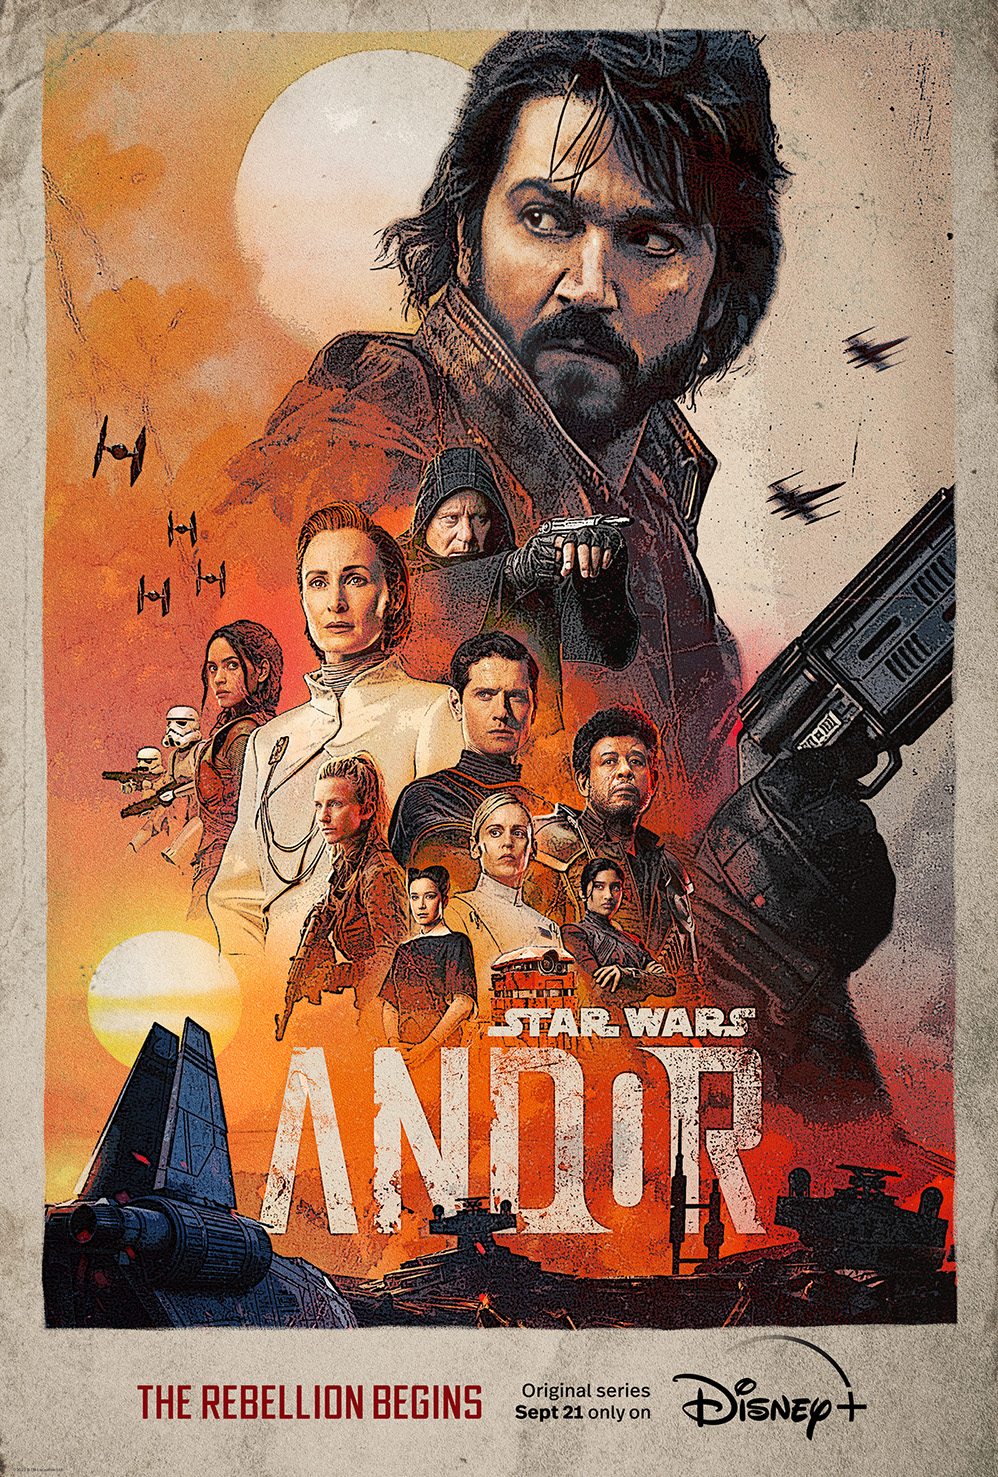 Star Wars’ Andor gets pushed back into September, but here’s a new trailer